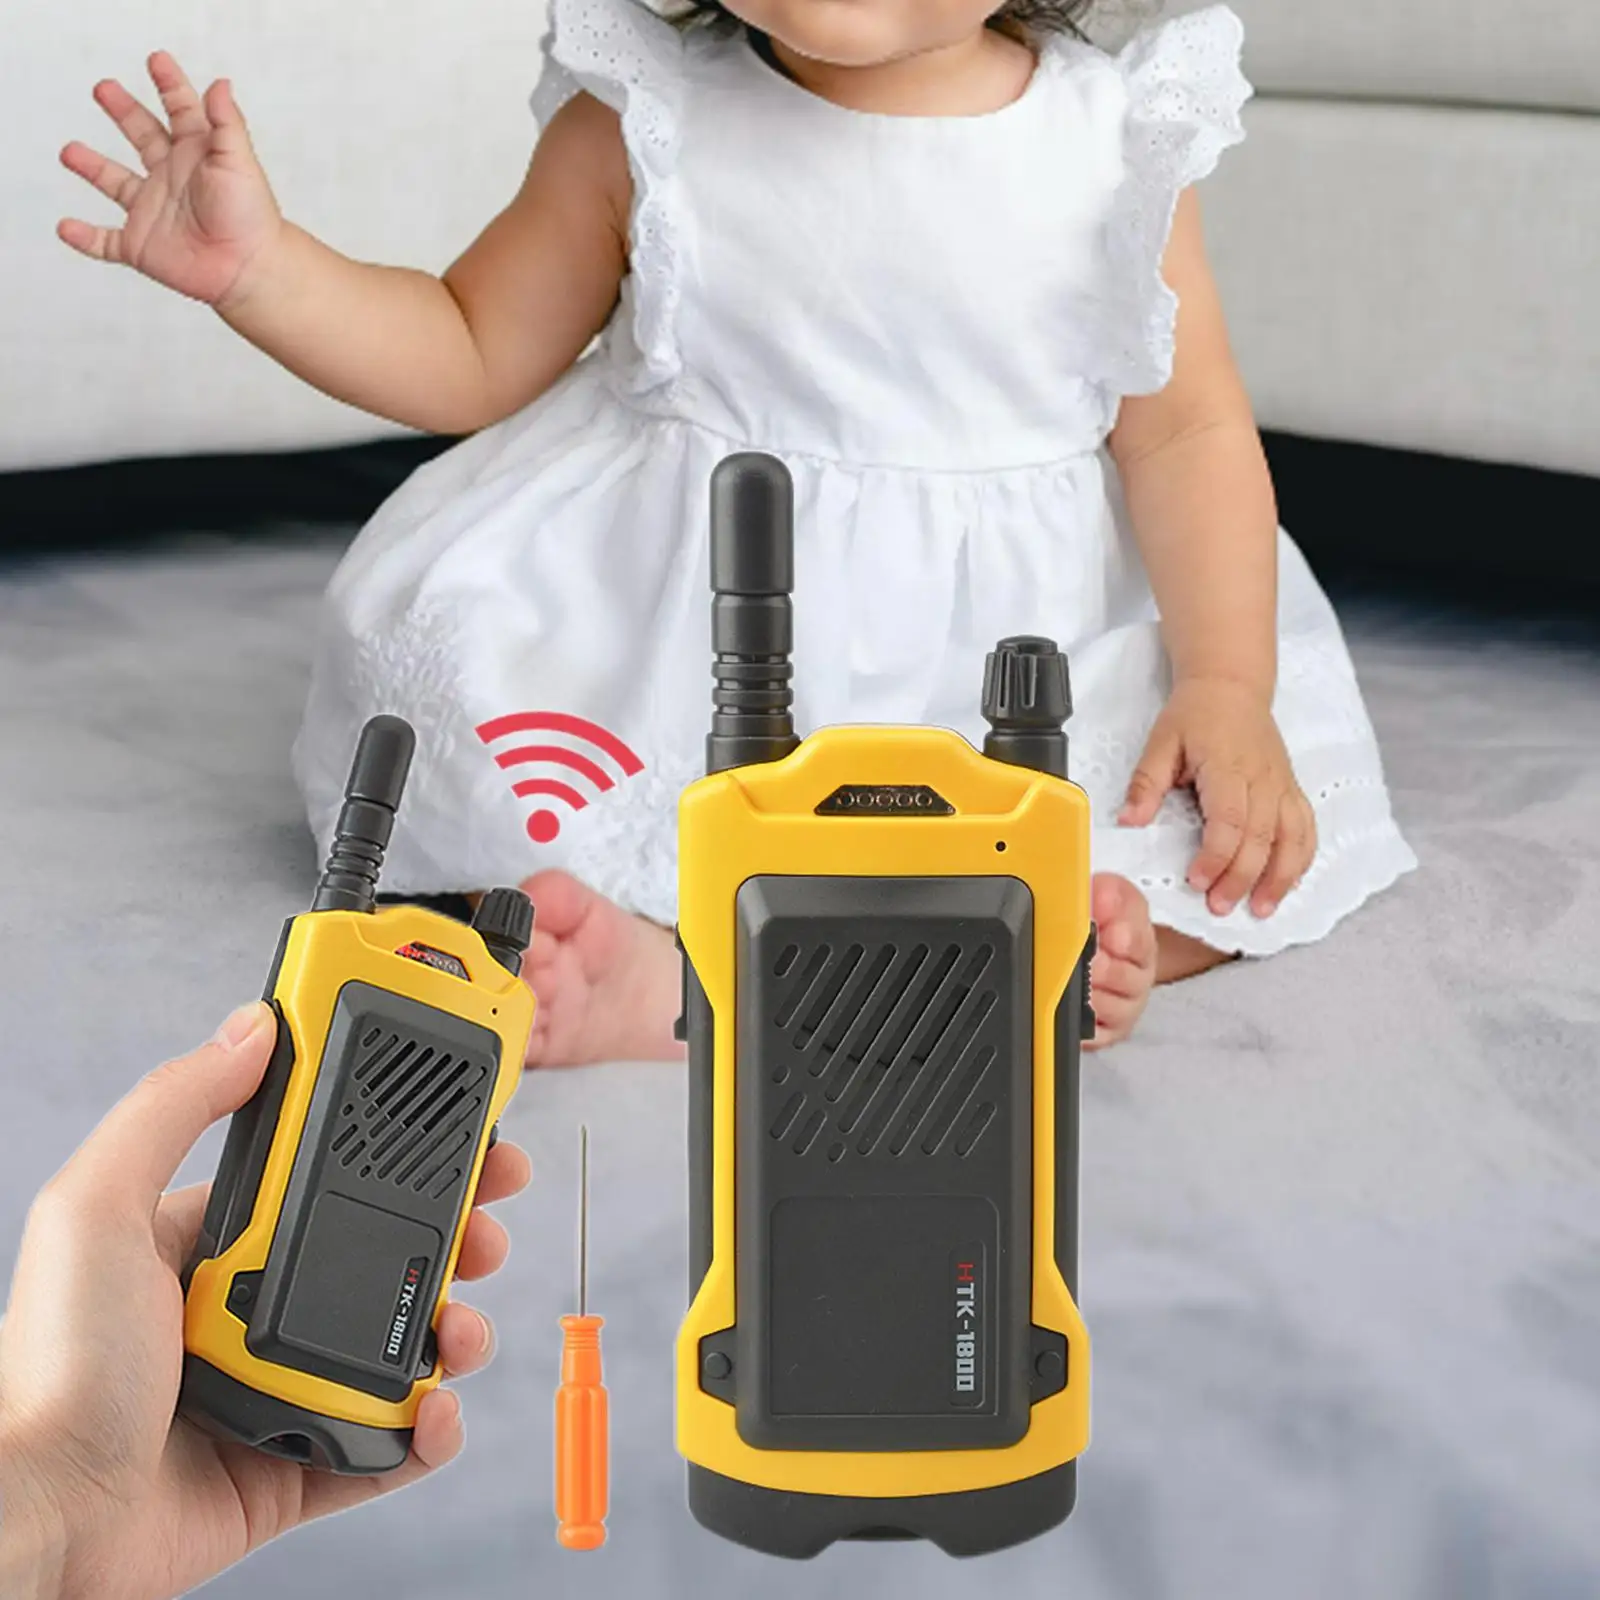 Handheld Talkies for Kids 200M Long Range Children Play House Toy 2x for Camping